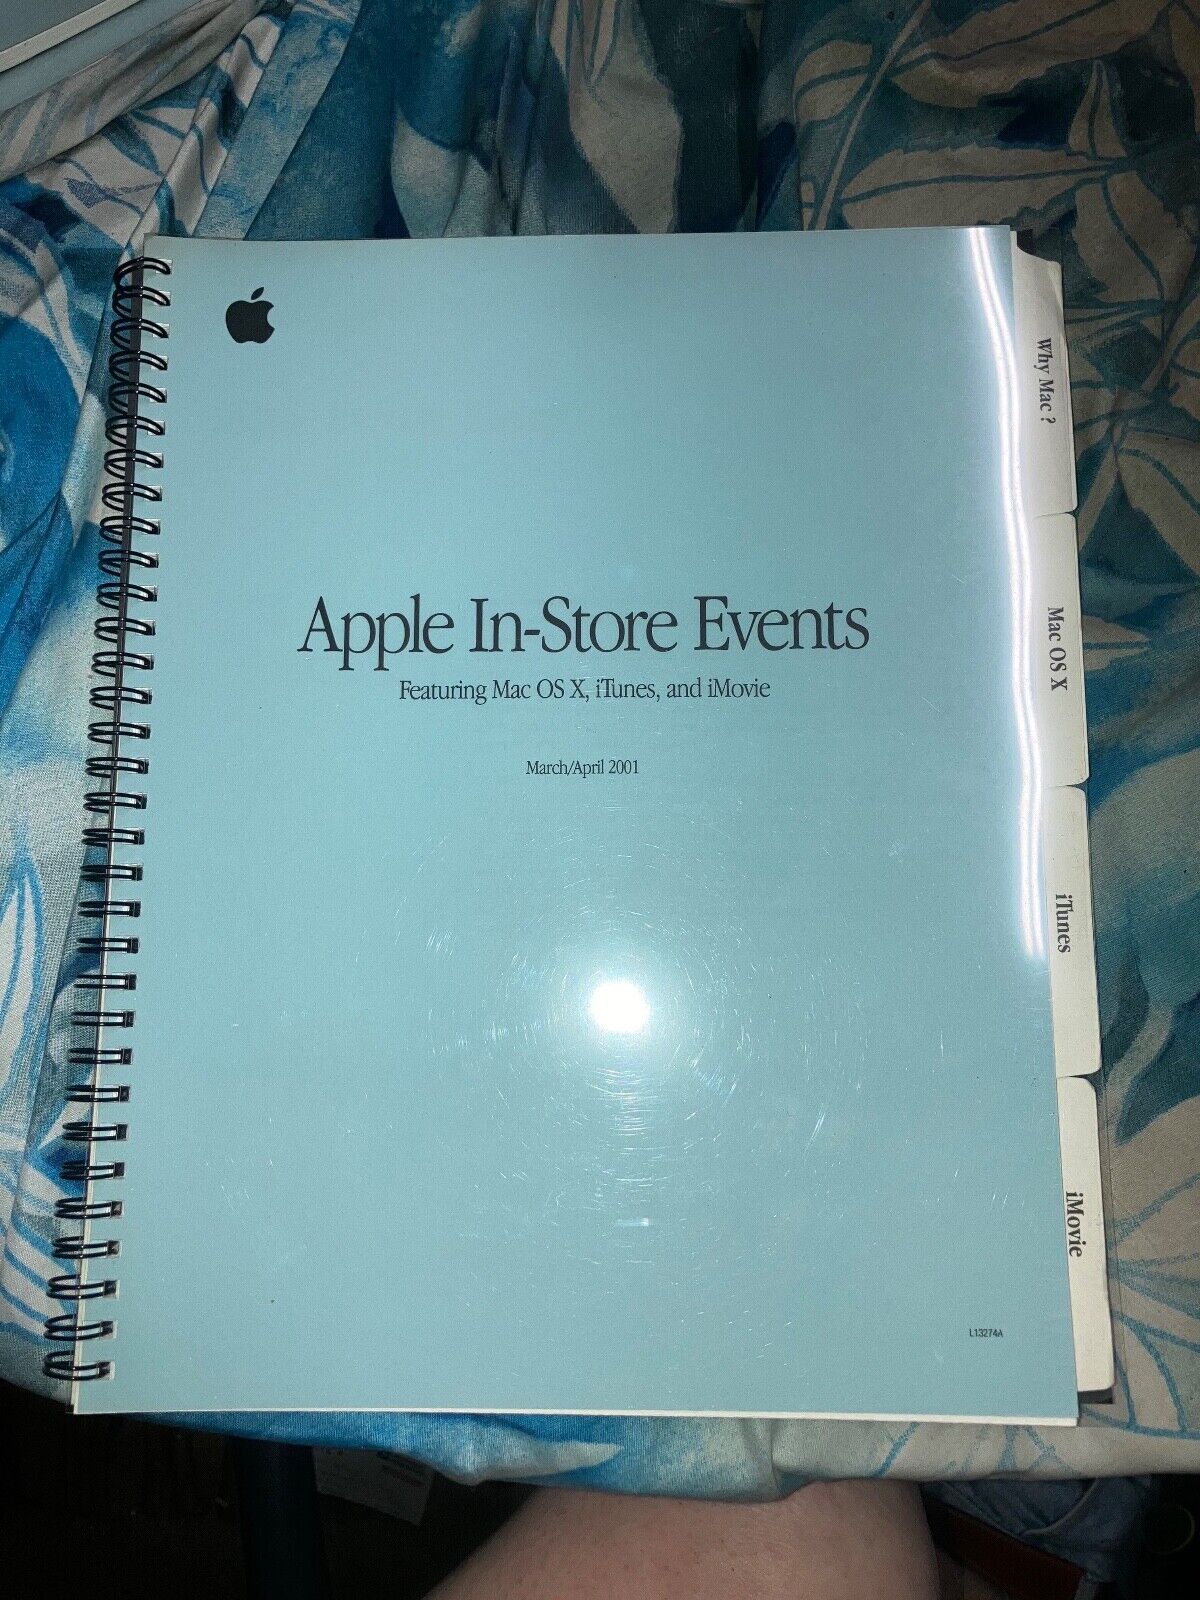 Apple Mac OS X, iMovie & iTunes In-Store Events Manual. New. Unused. Very Rare.